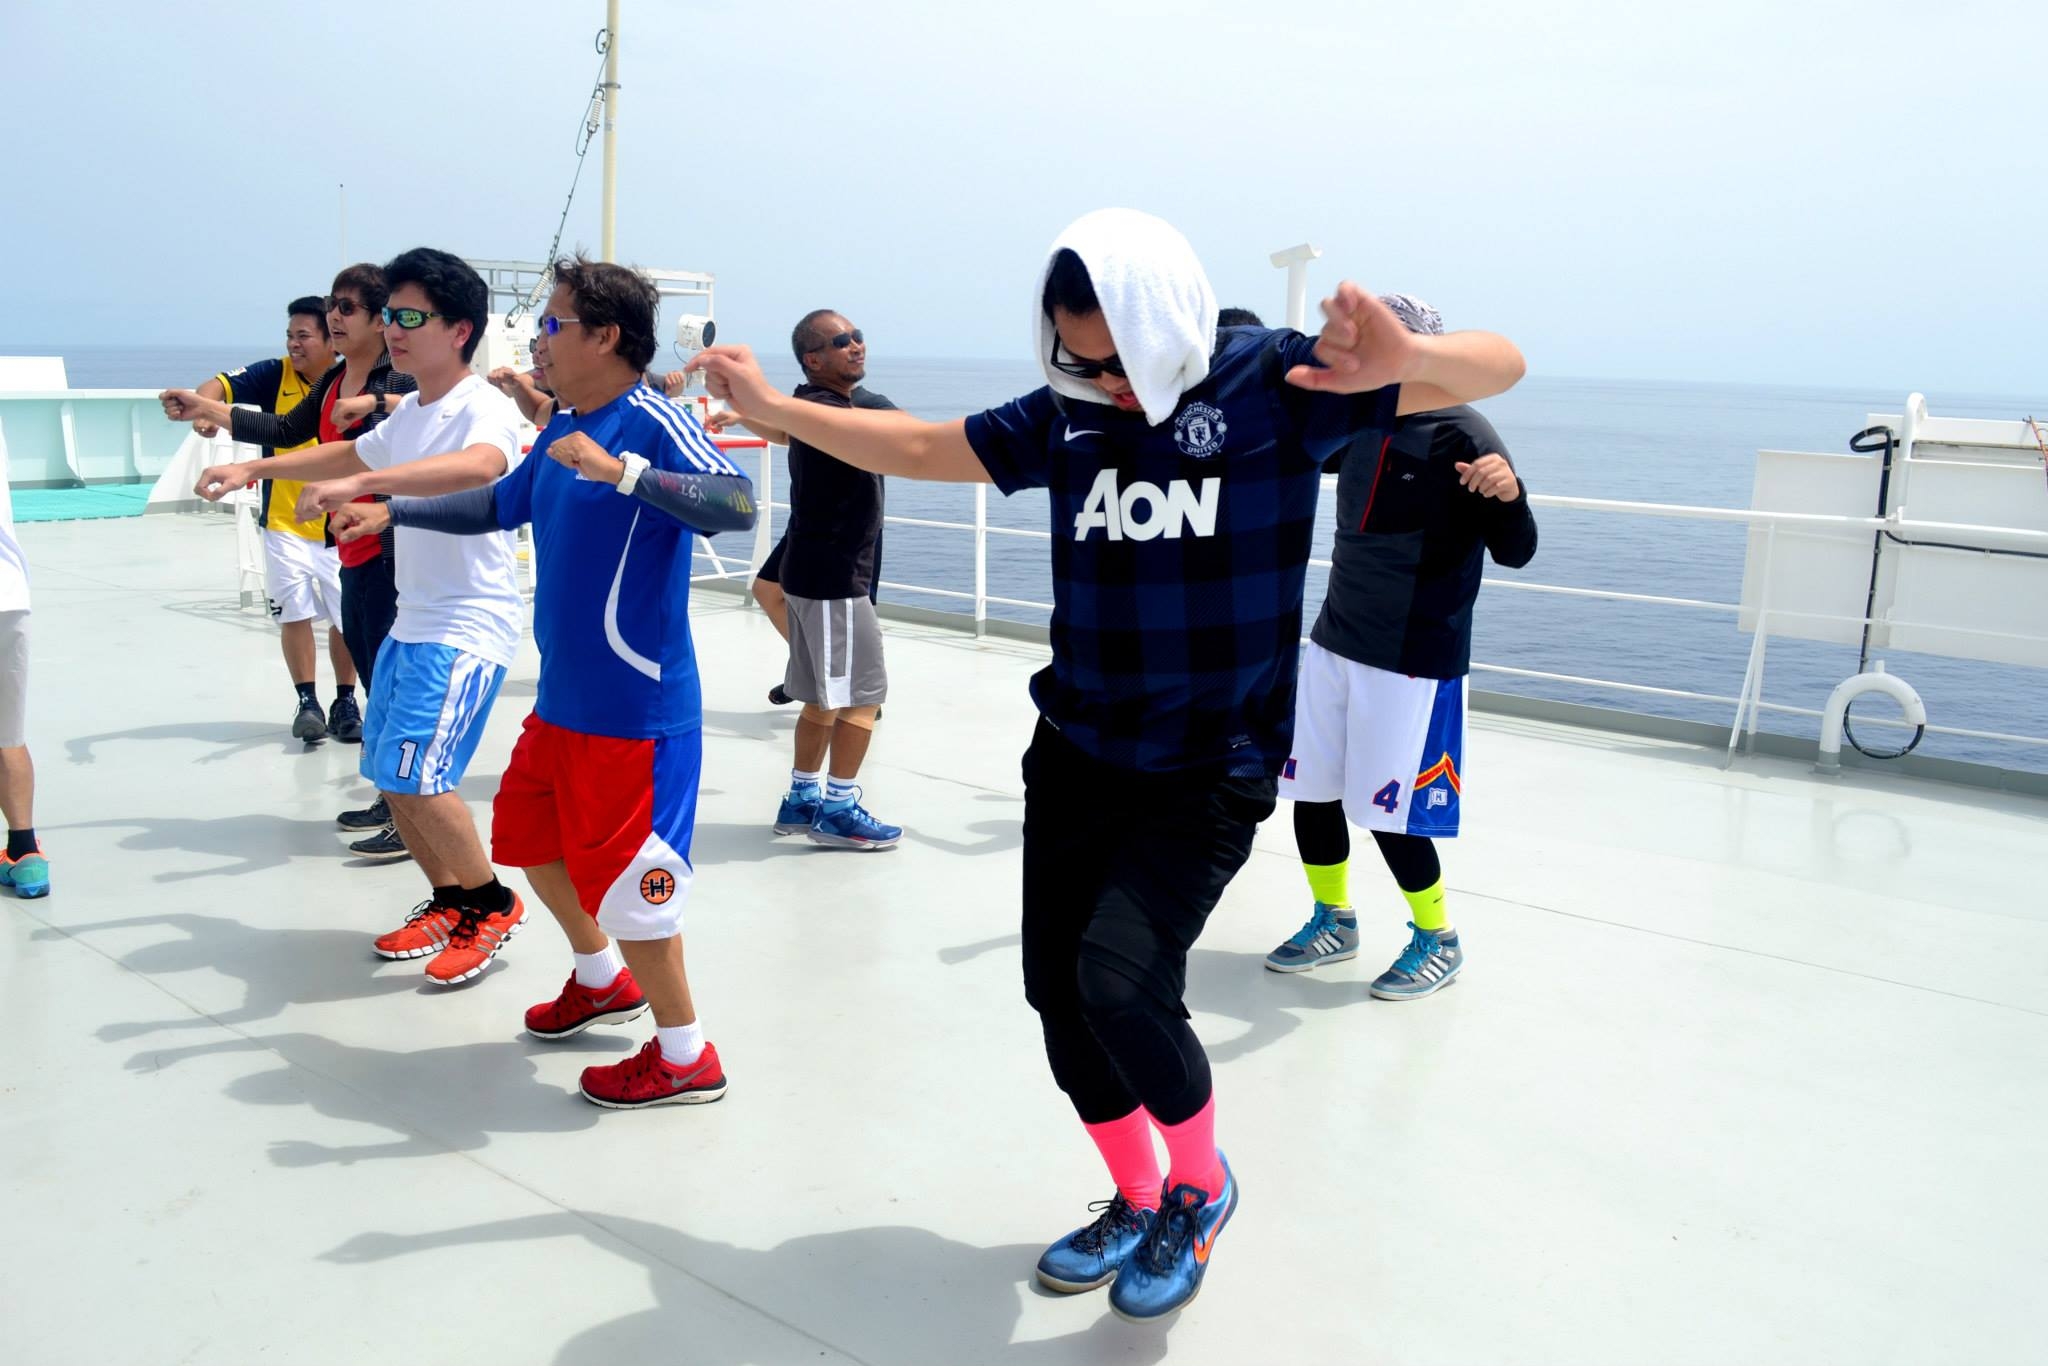 Physical activity important for seafarers&#8217; wellbeing